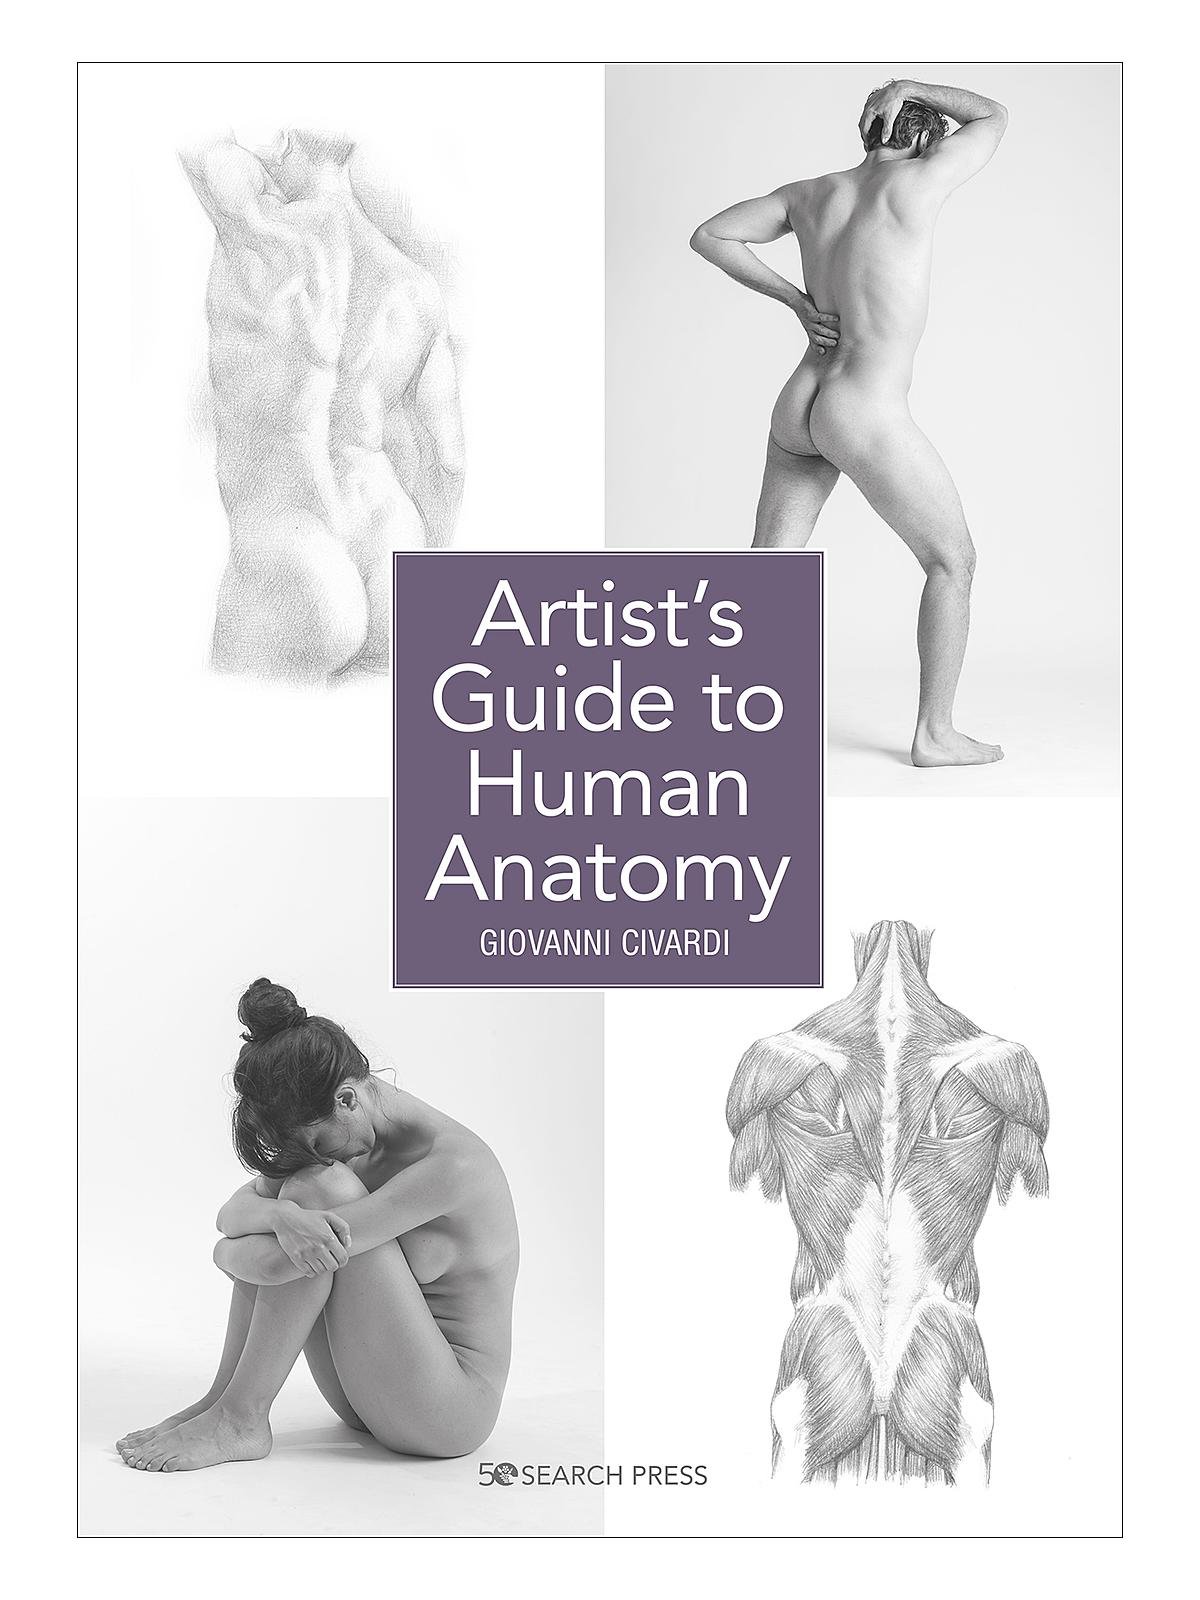 Search Press - Artist's Guide to Human Anatomy